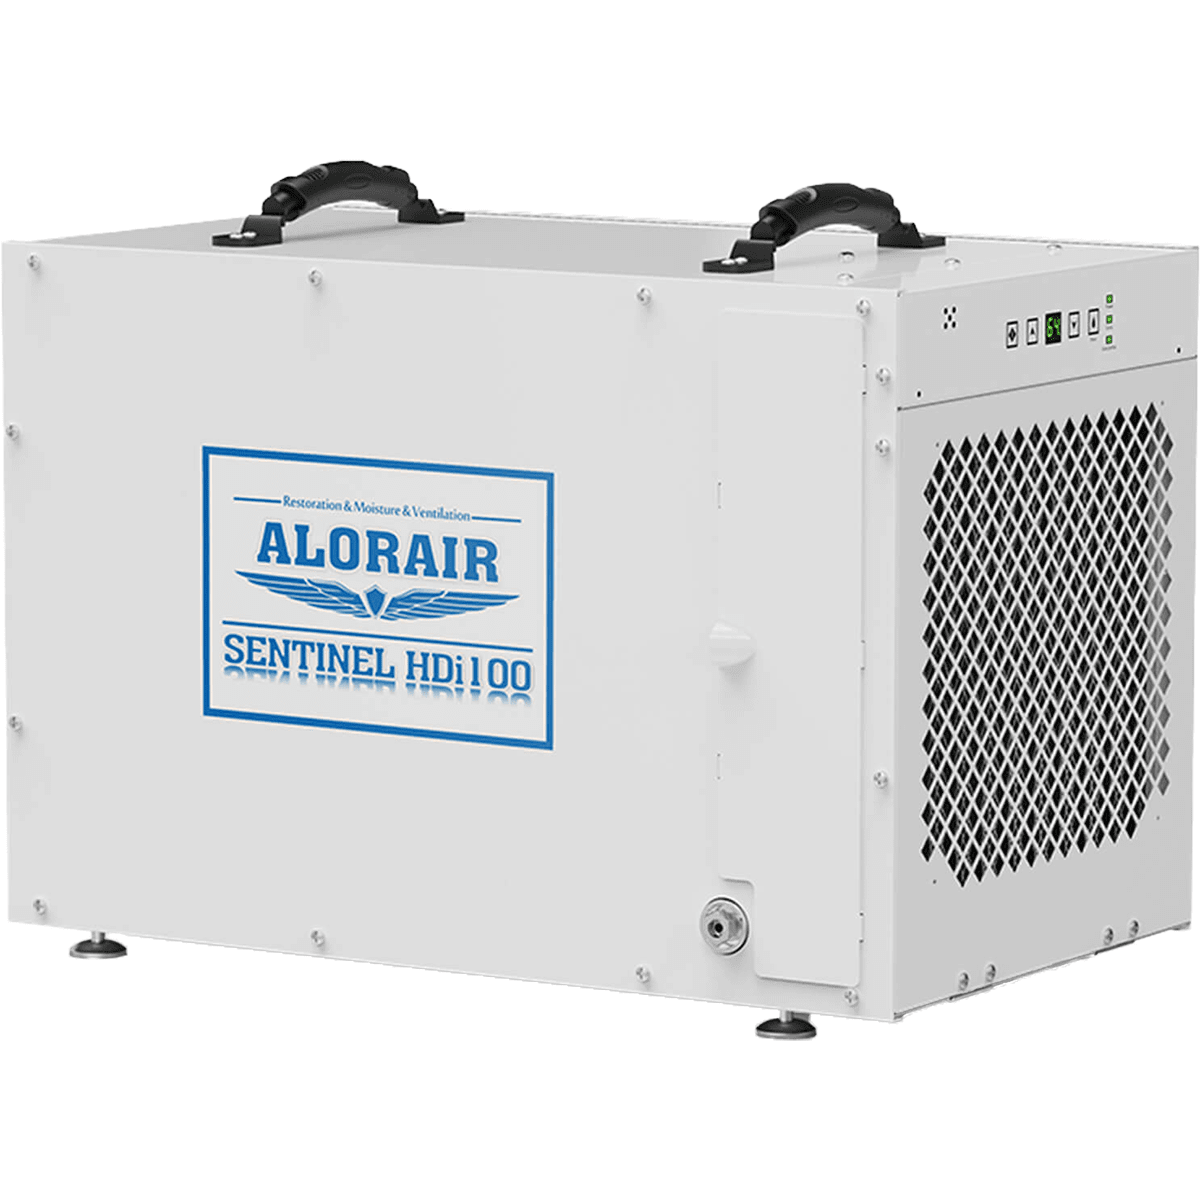 AlorAir Sentinel 100 Pint at AHAM Dehumidifier With Pump for Whole Home, Crawl Spaces, or Basements Up to 2,900 Sq. Ft.